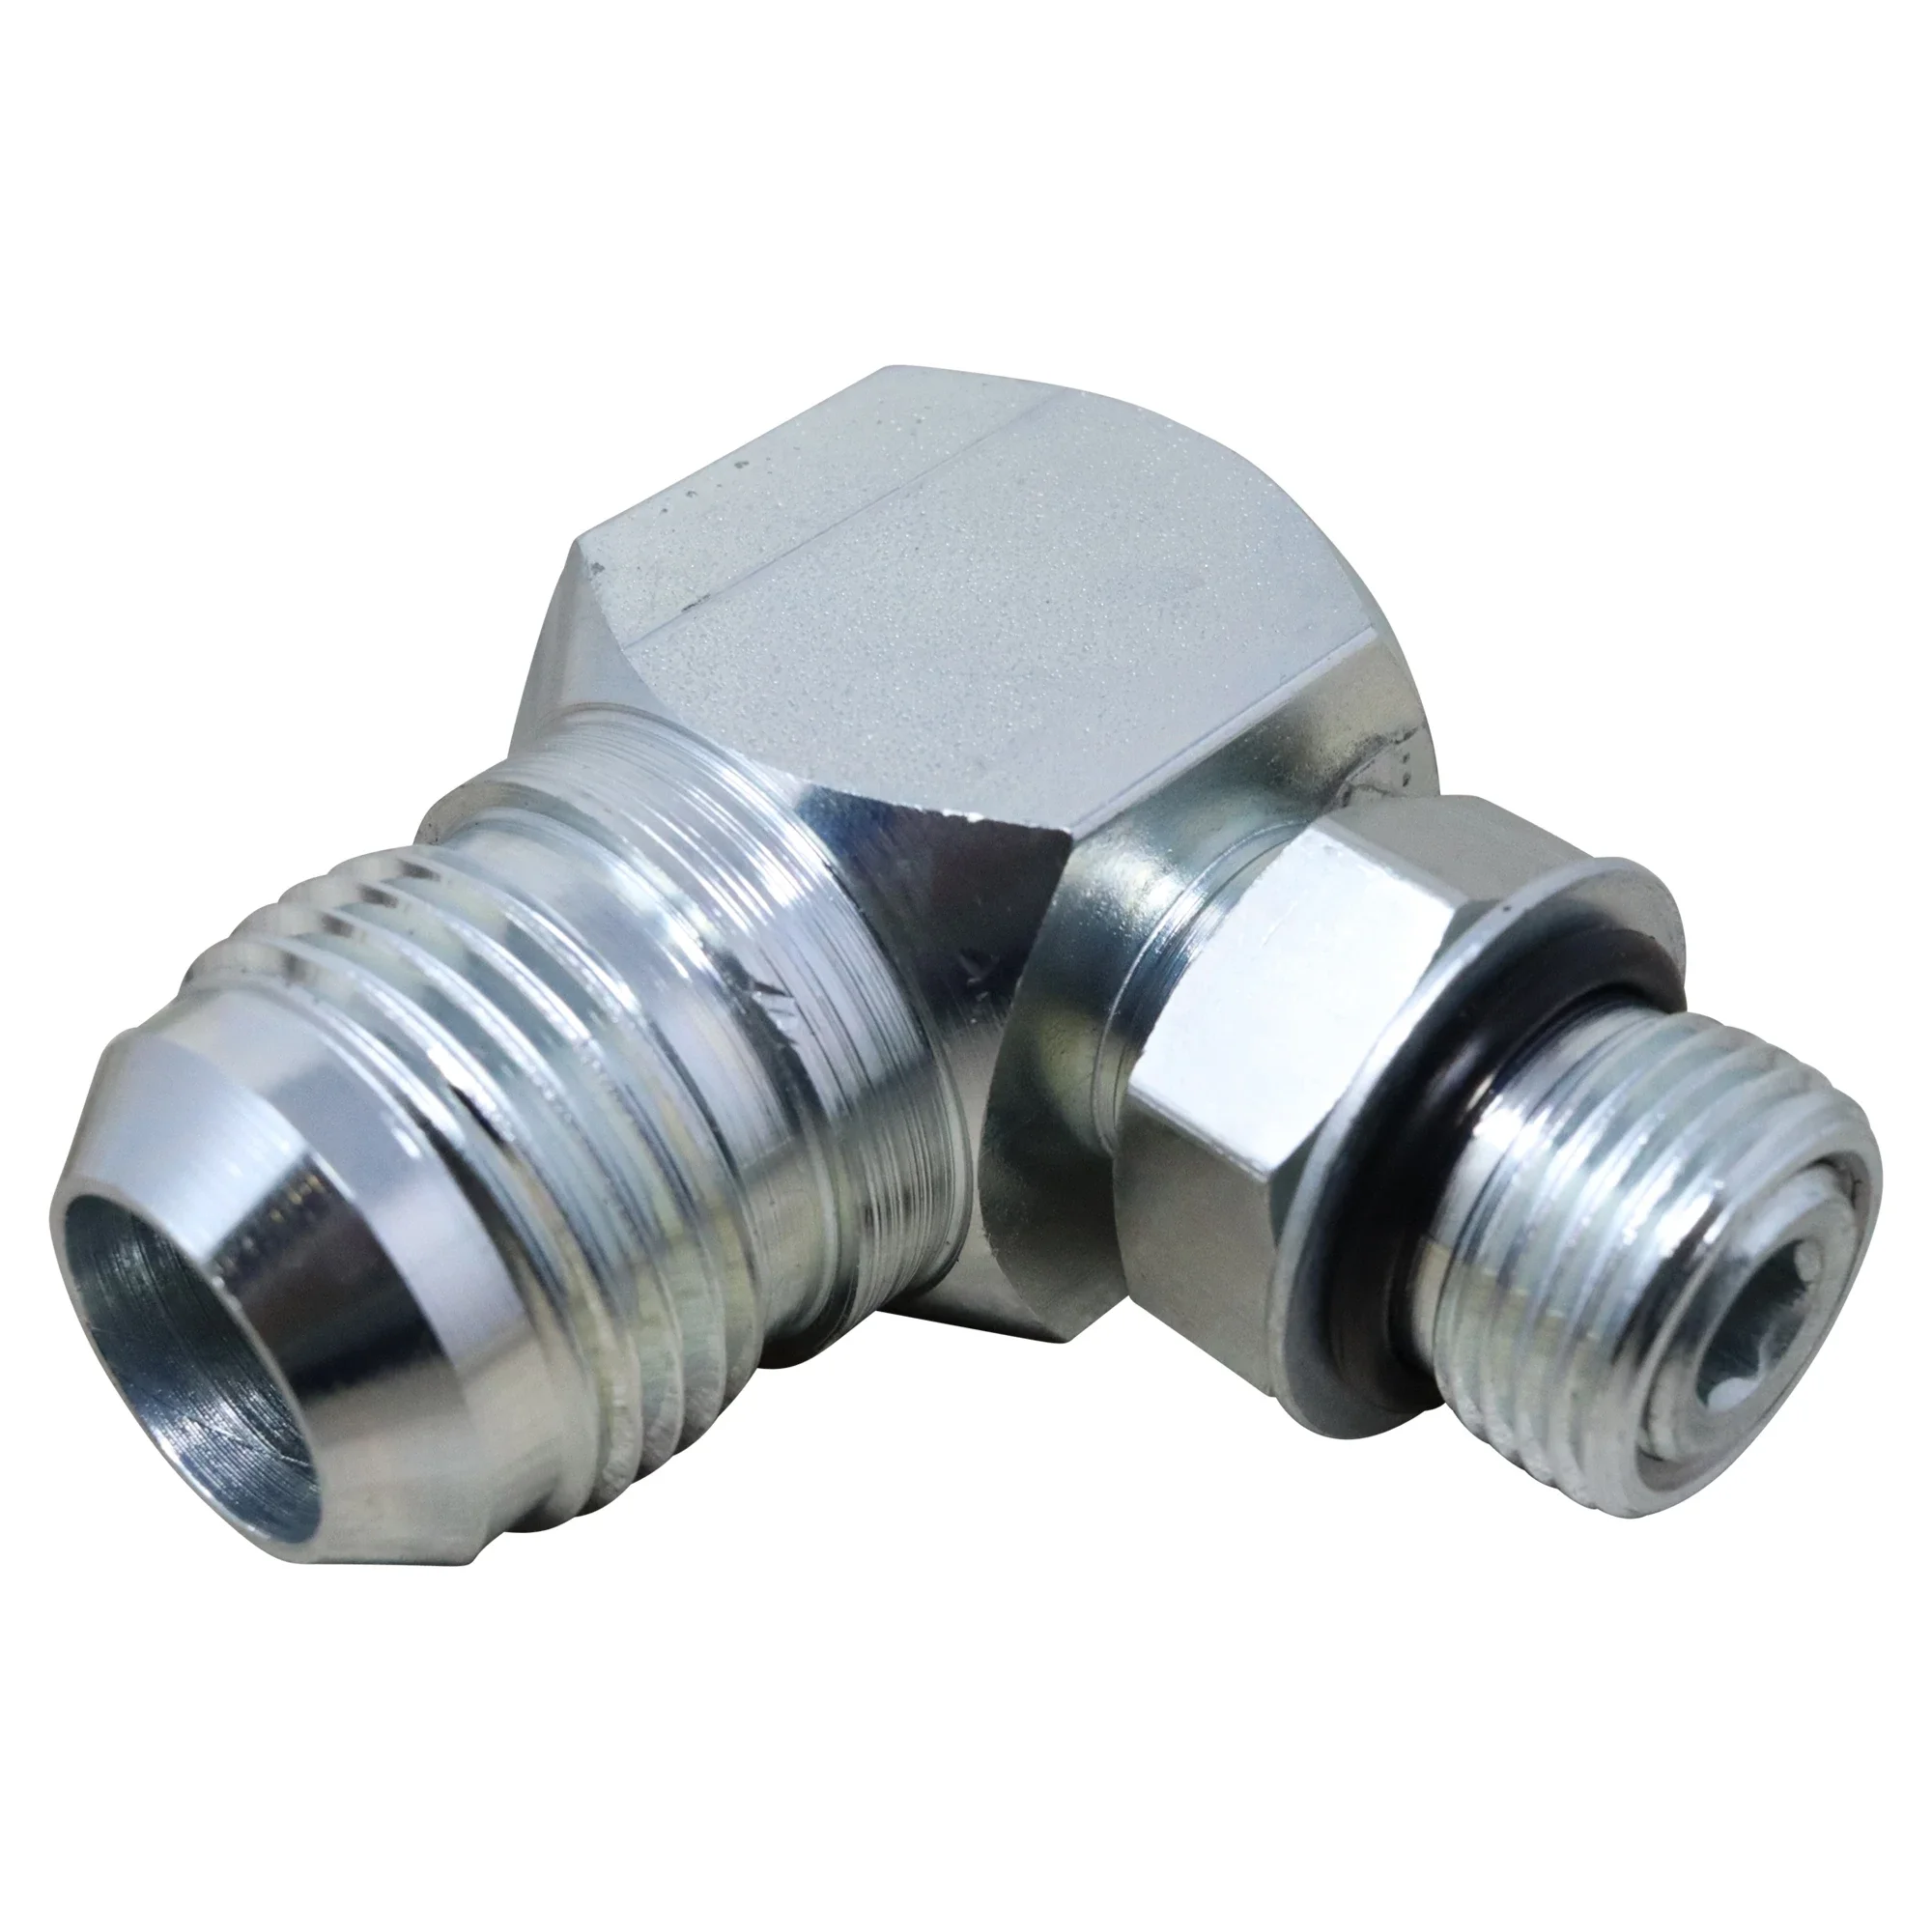 Wastebuilt® Replacement for Heil 90 Degree .125 Orifice Fitting